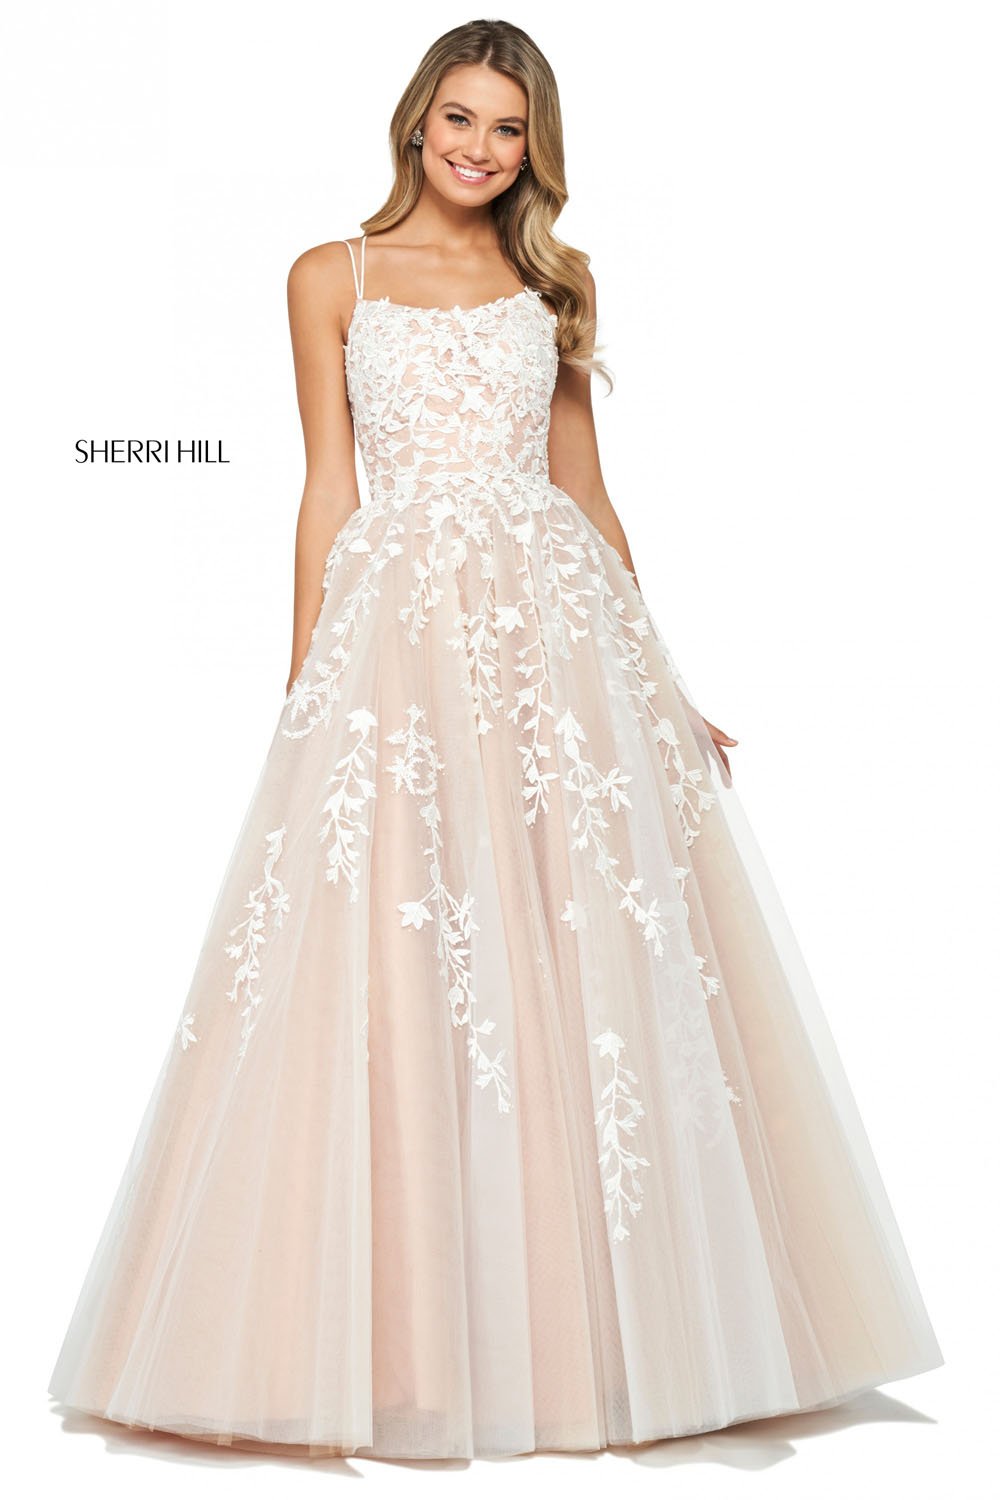 Sherri Hill 53116 dress images in these colors: Black, Gold, Yellow, Light Blue, Blush, Red, Ivory Nude, Lilac, Navy, Wine, Bright Pink, Coral.